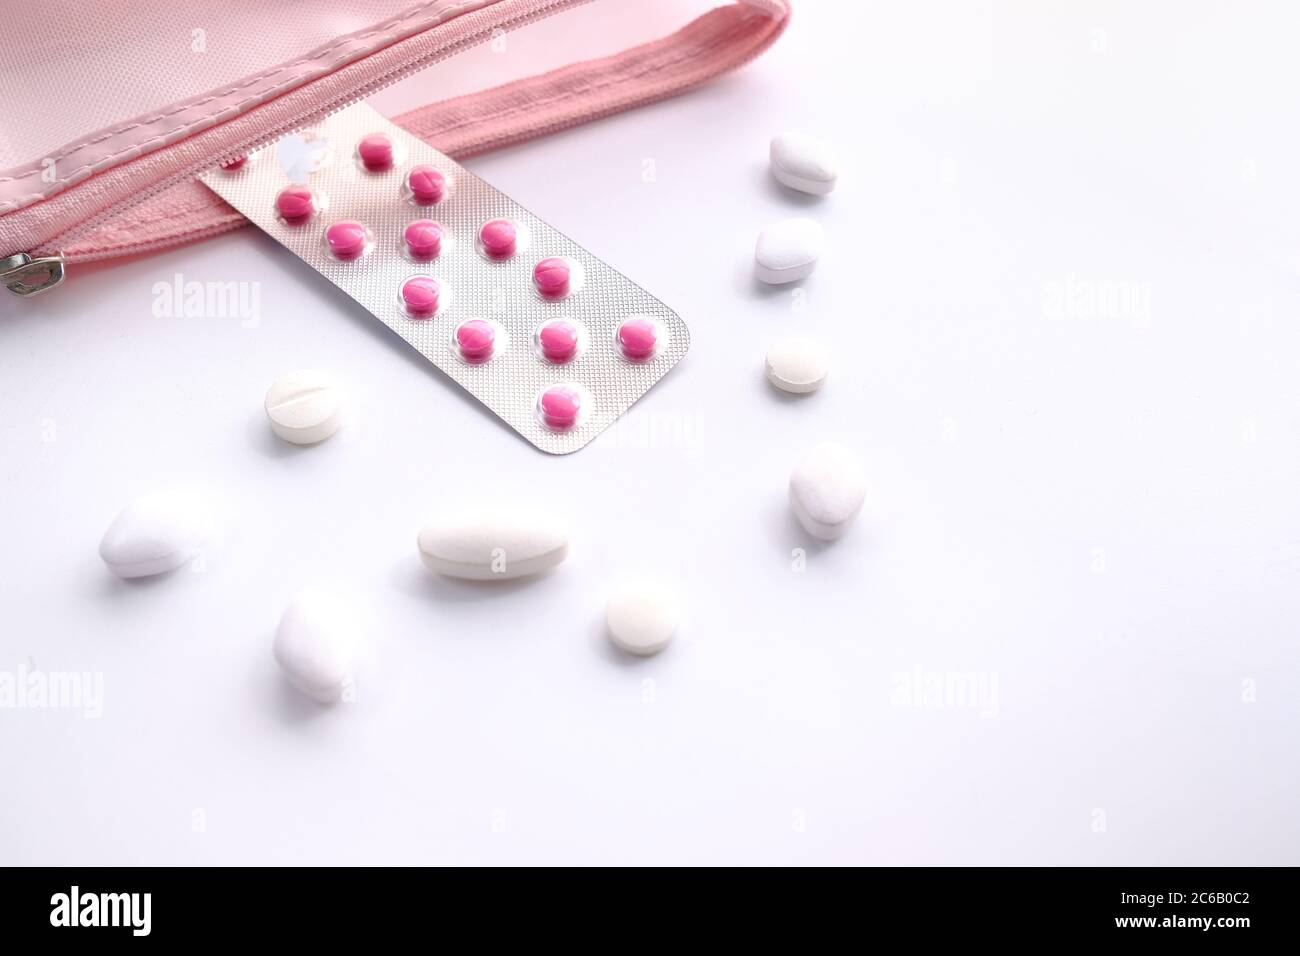 white pills and blister pack on white background  Stock Photo